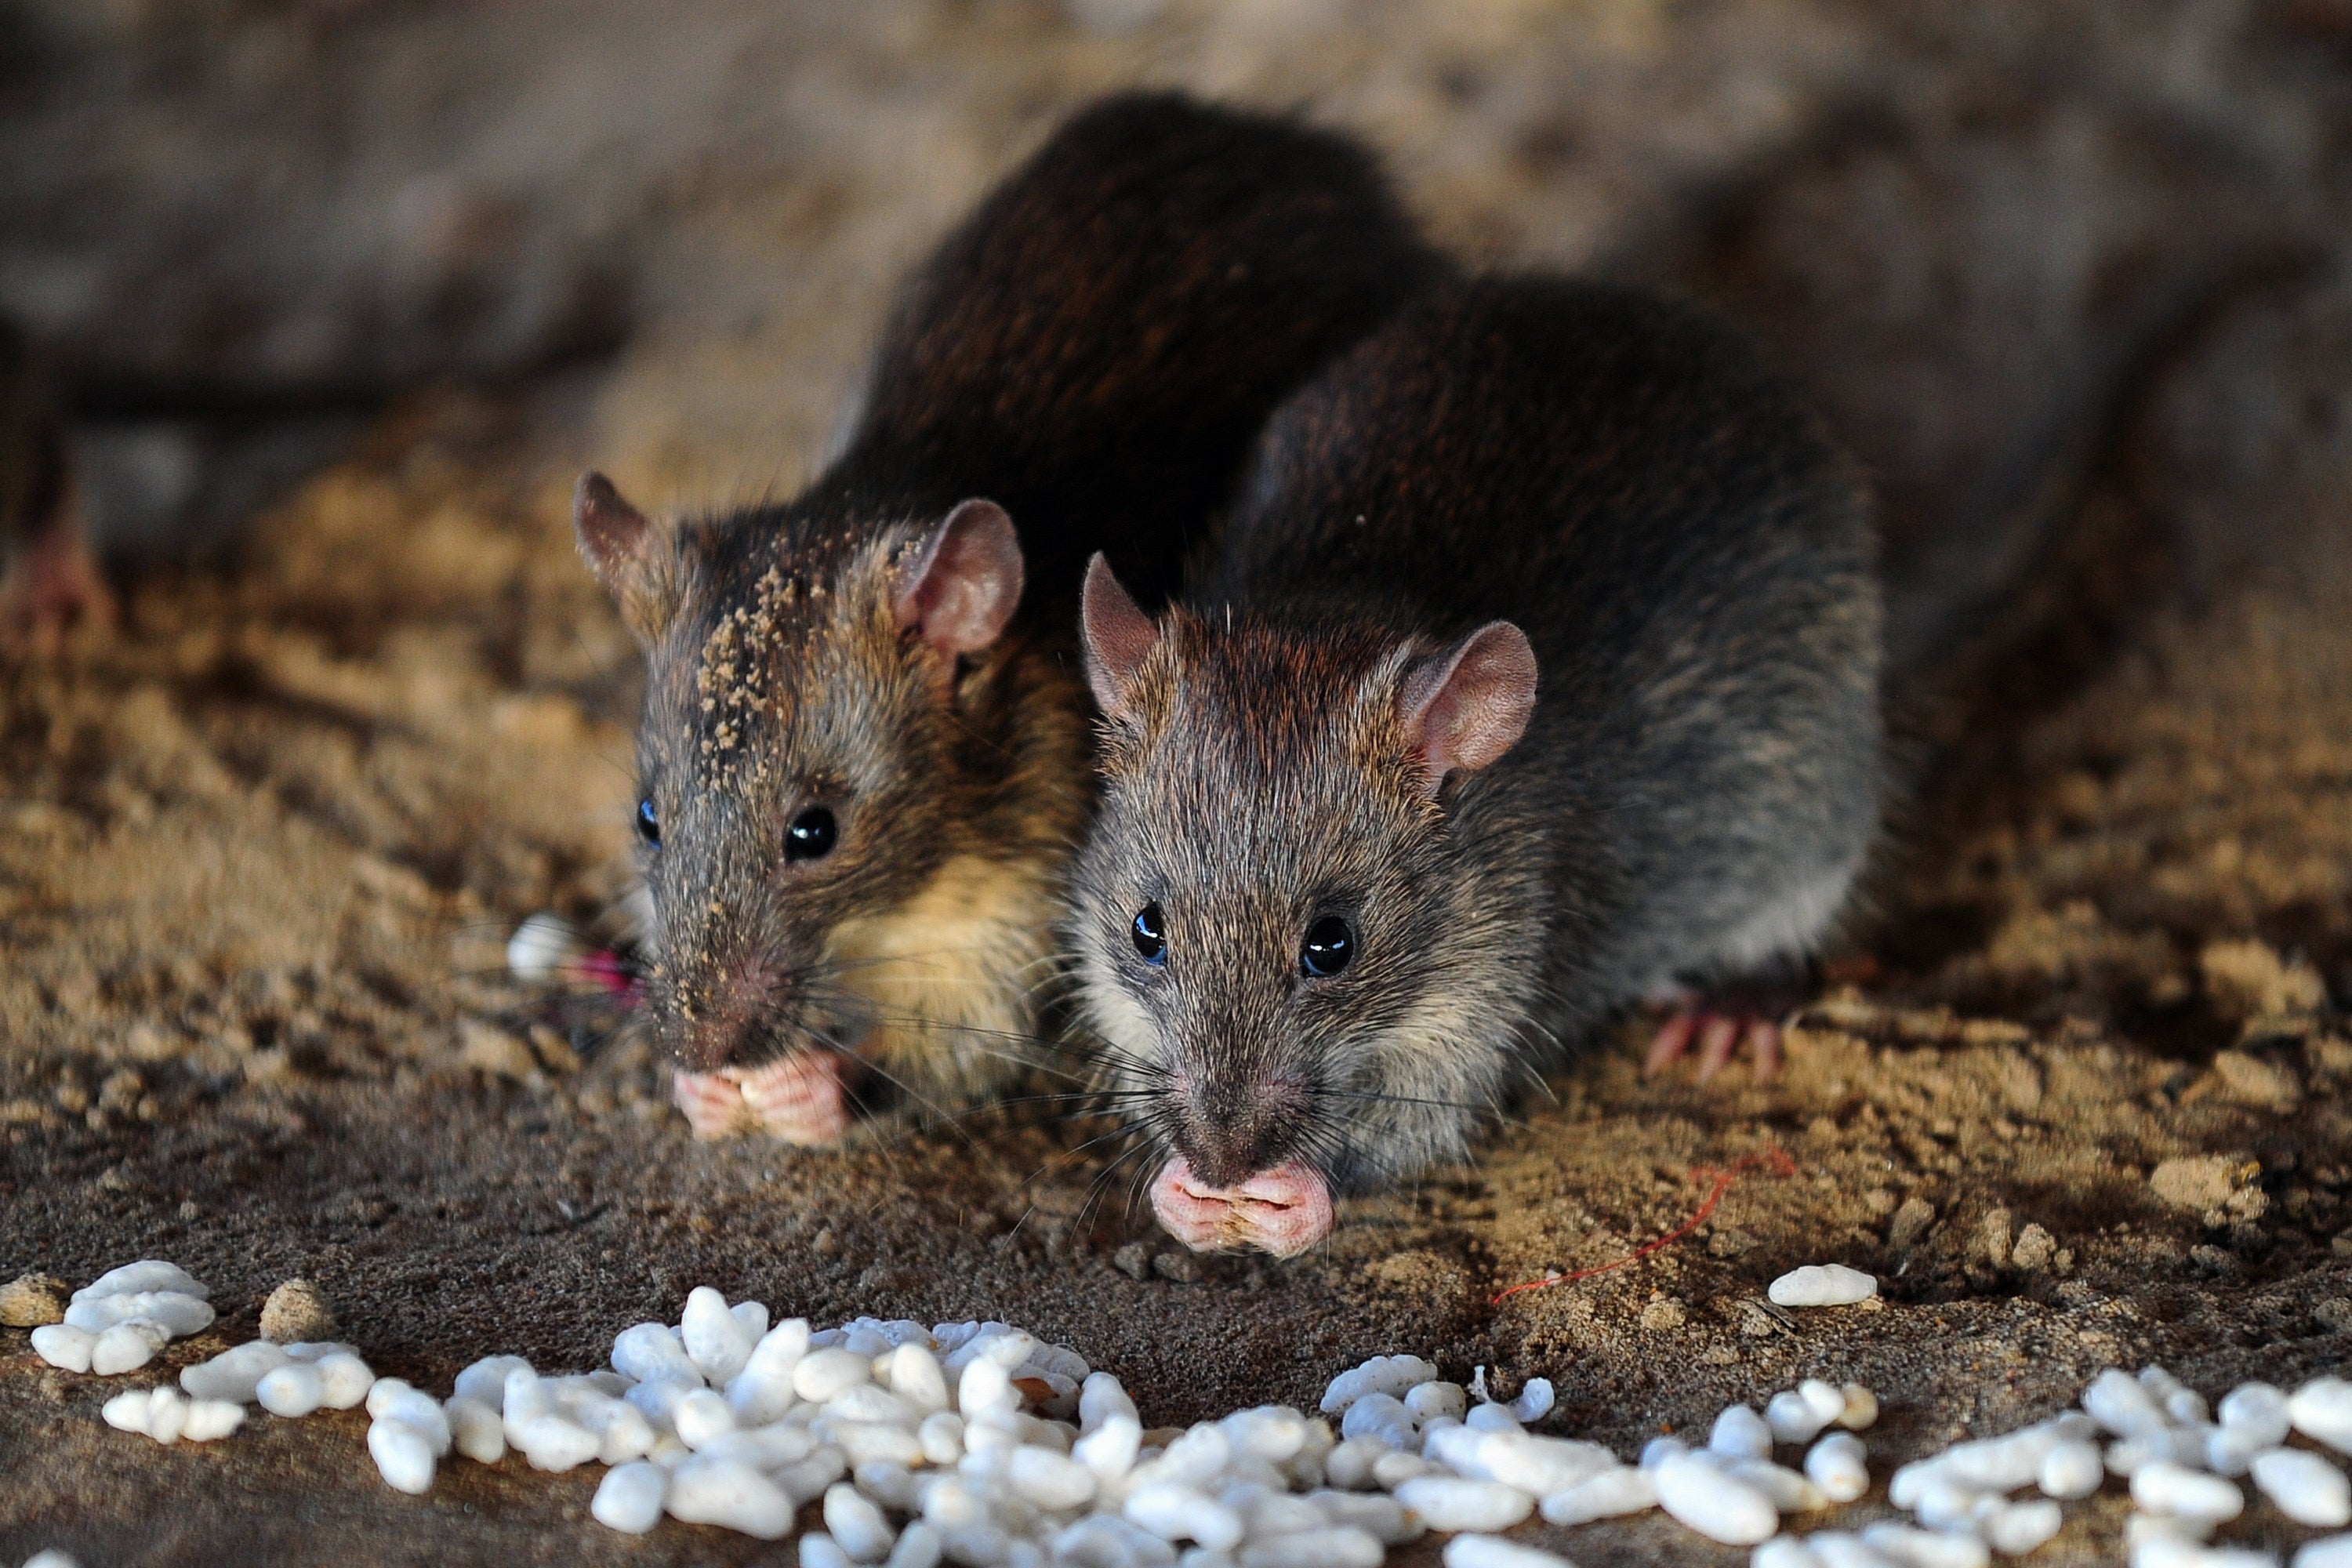 Cleansing workers in Glasgow have been hospitalised following contact with rats